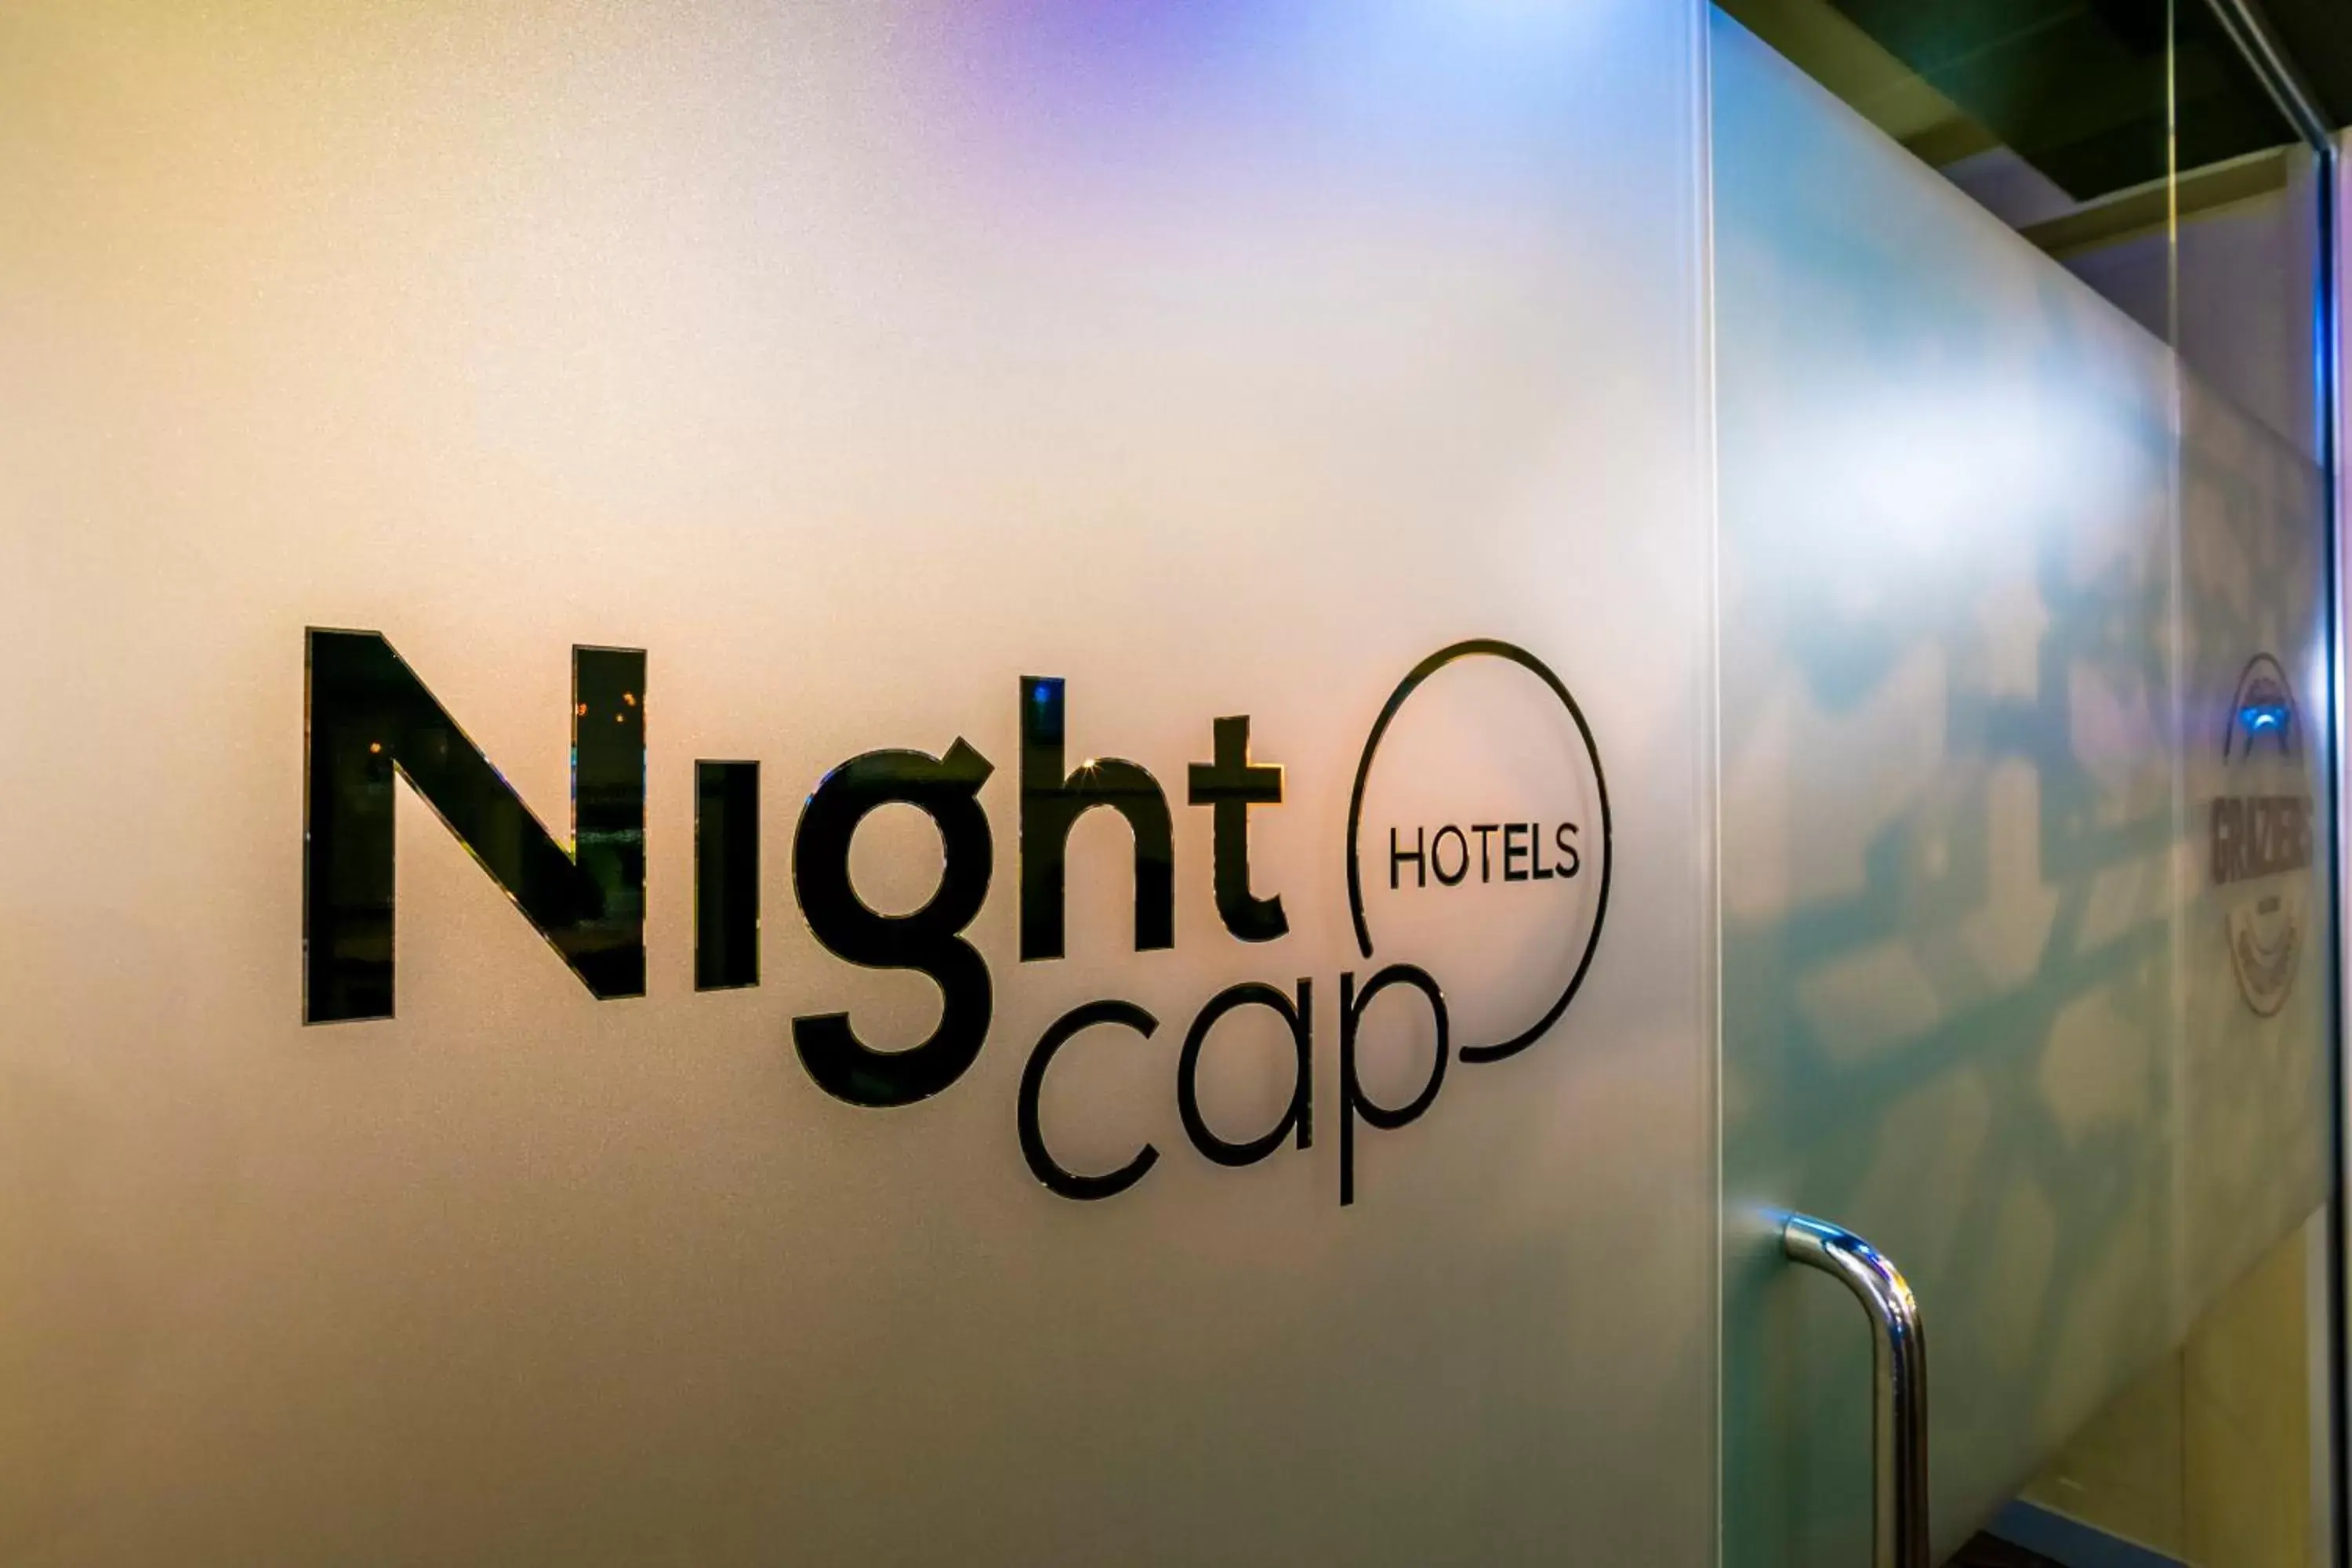 Property building, Property Logo/Sign in Nightcap at Caringbah Hotel